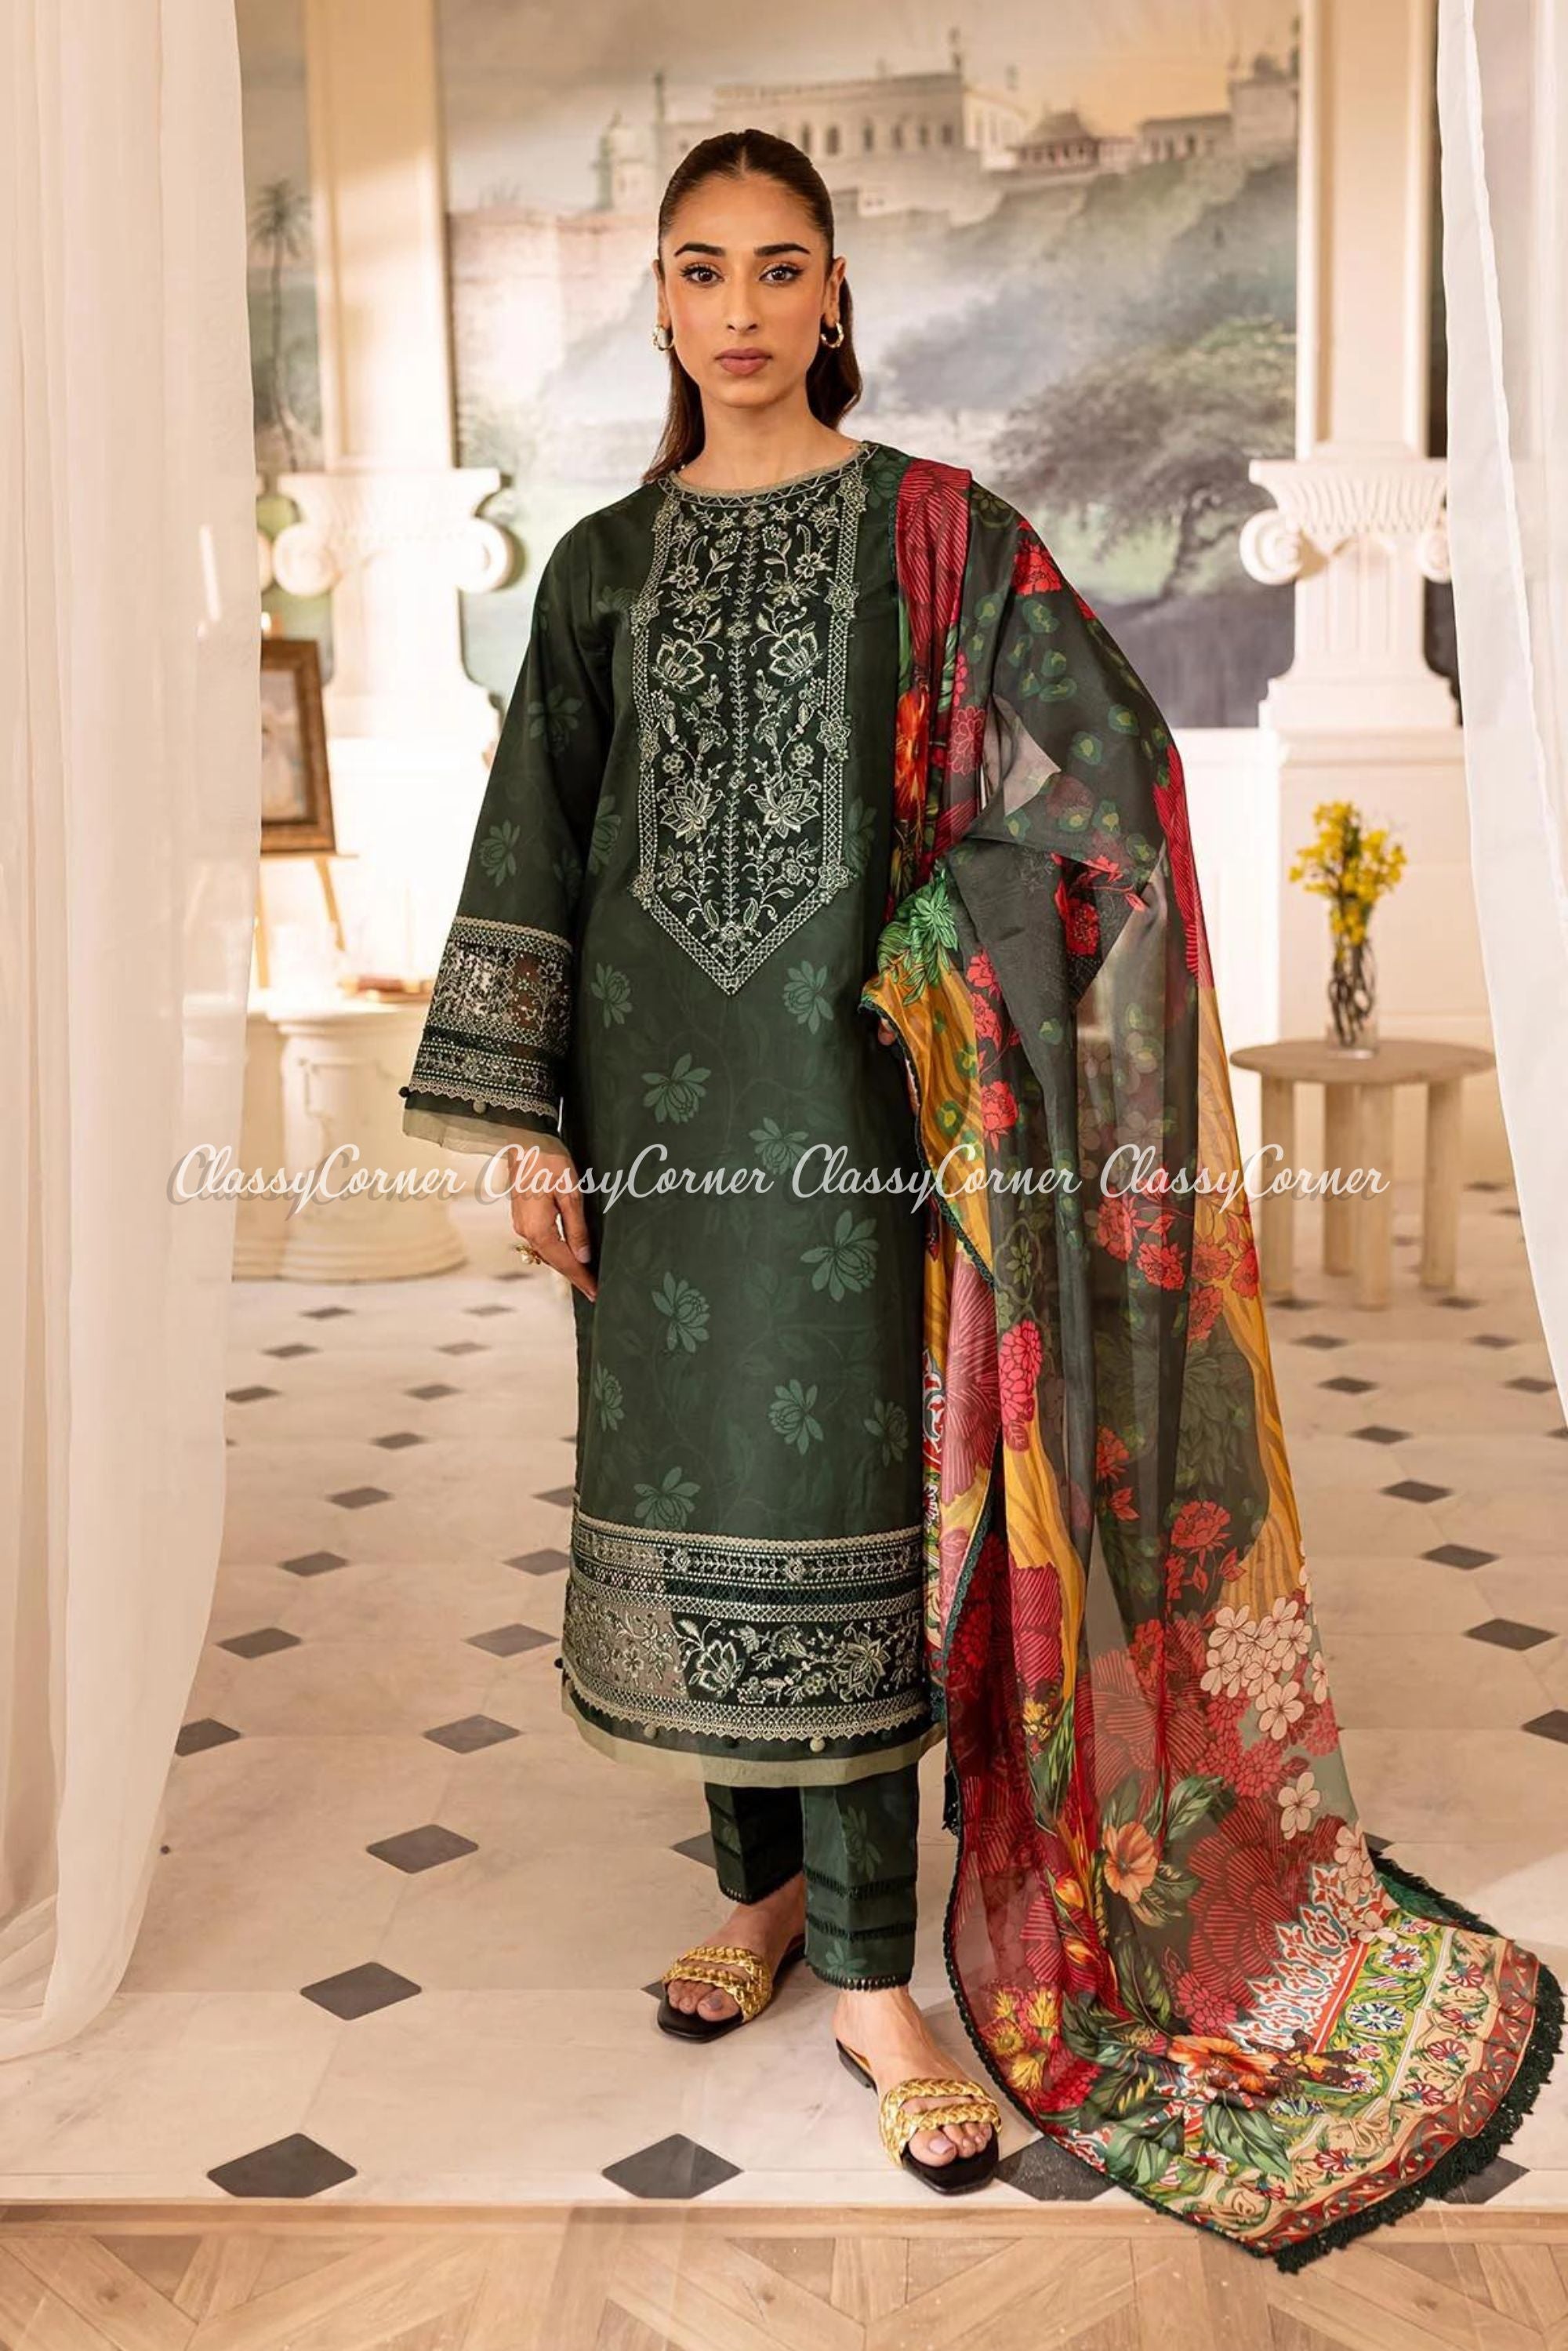 Pakistani Formal Suits For Women In Sydney